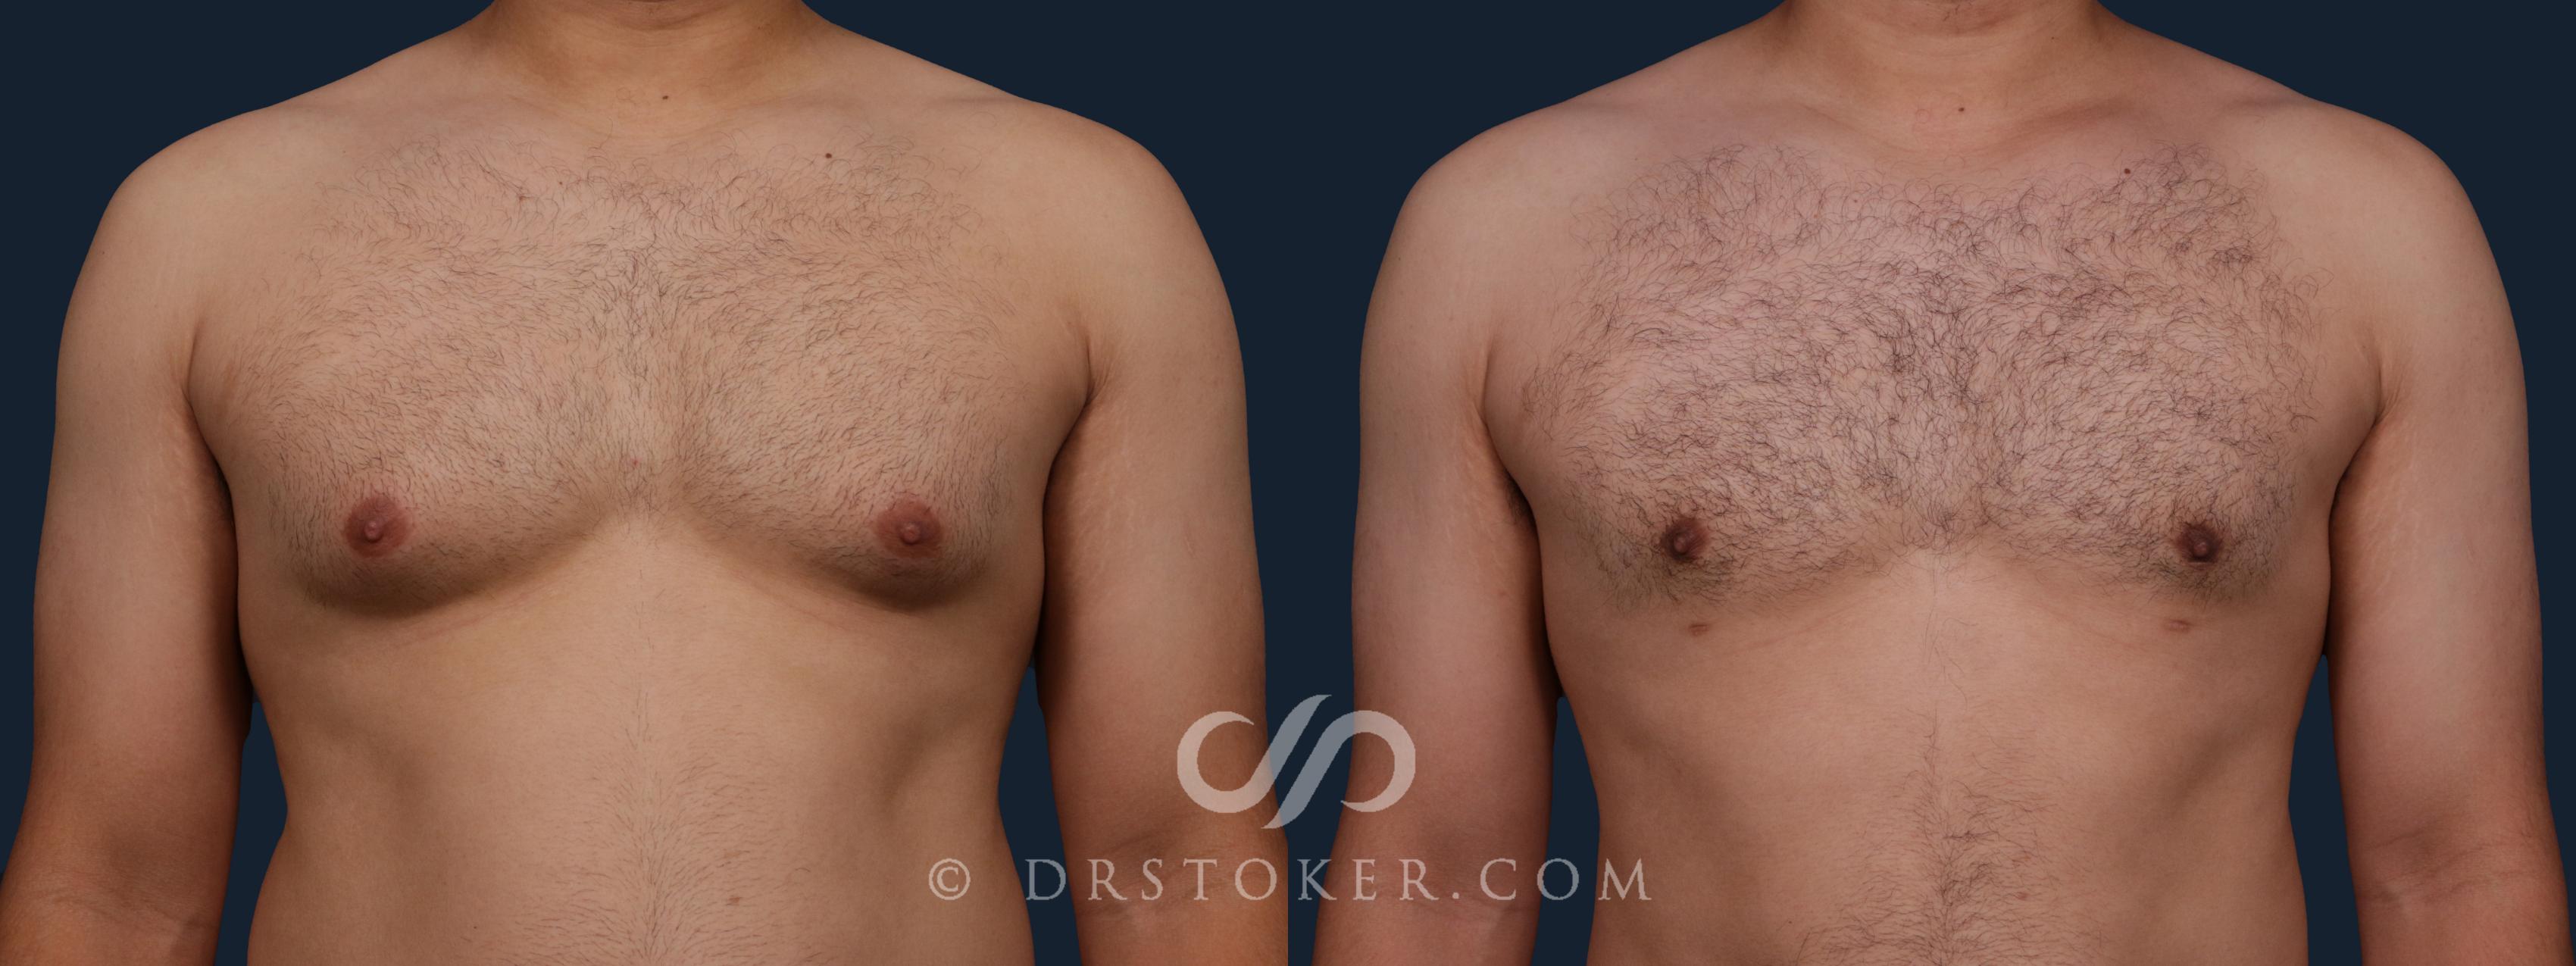 Before & After Breast Reduction for Men (Gynecomastia) Case 2177 Front View in Los Angeles, CA